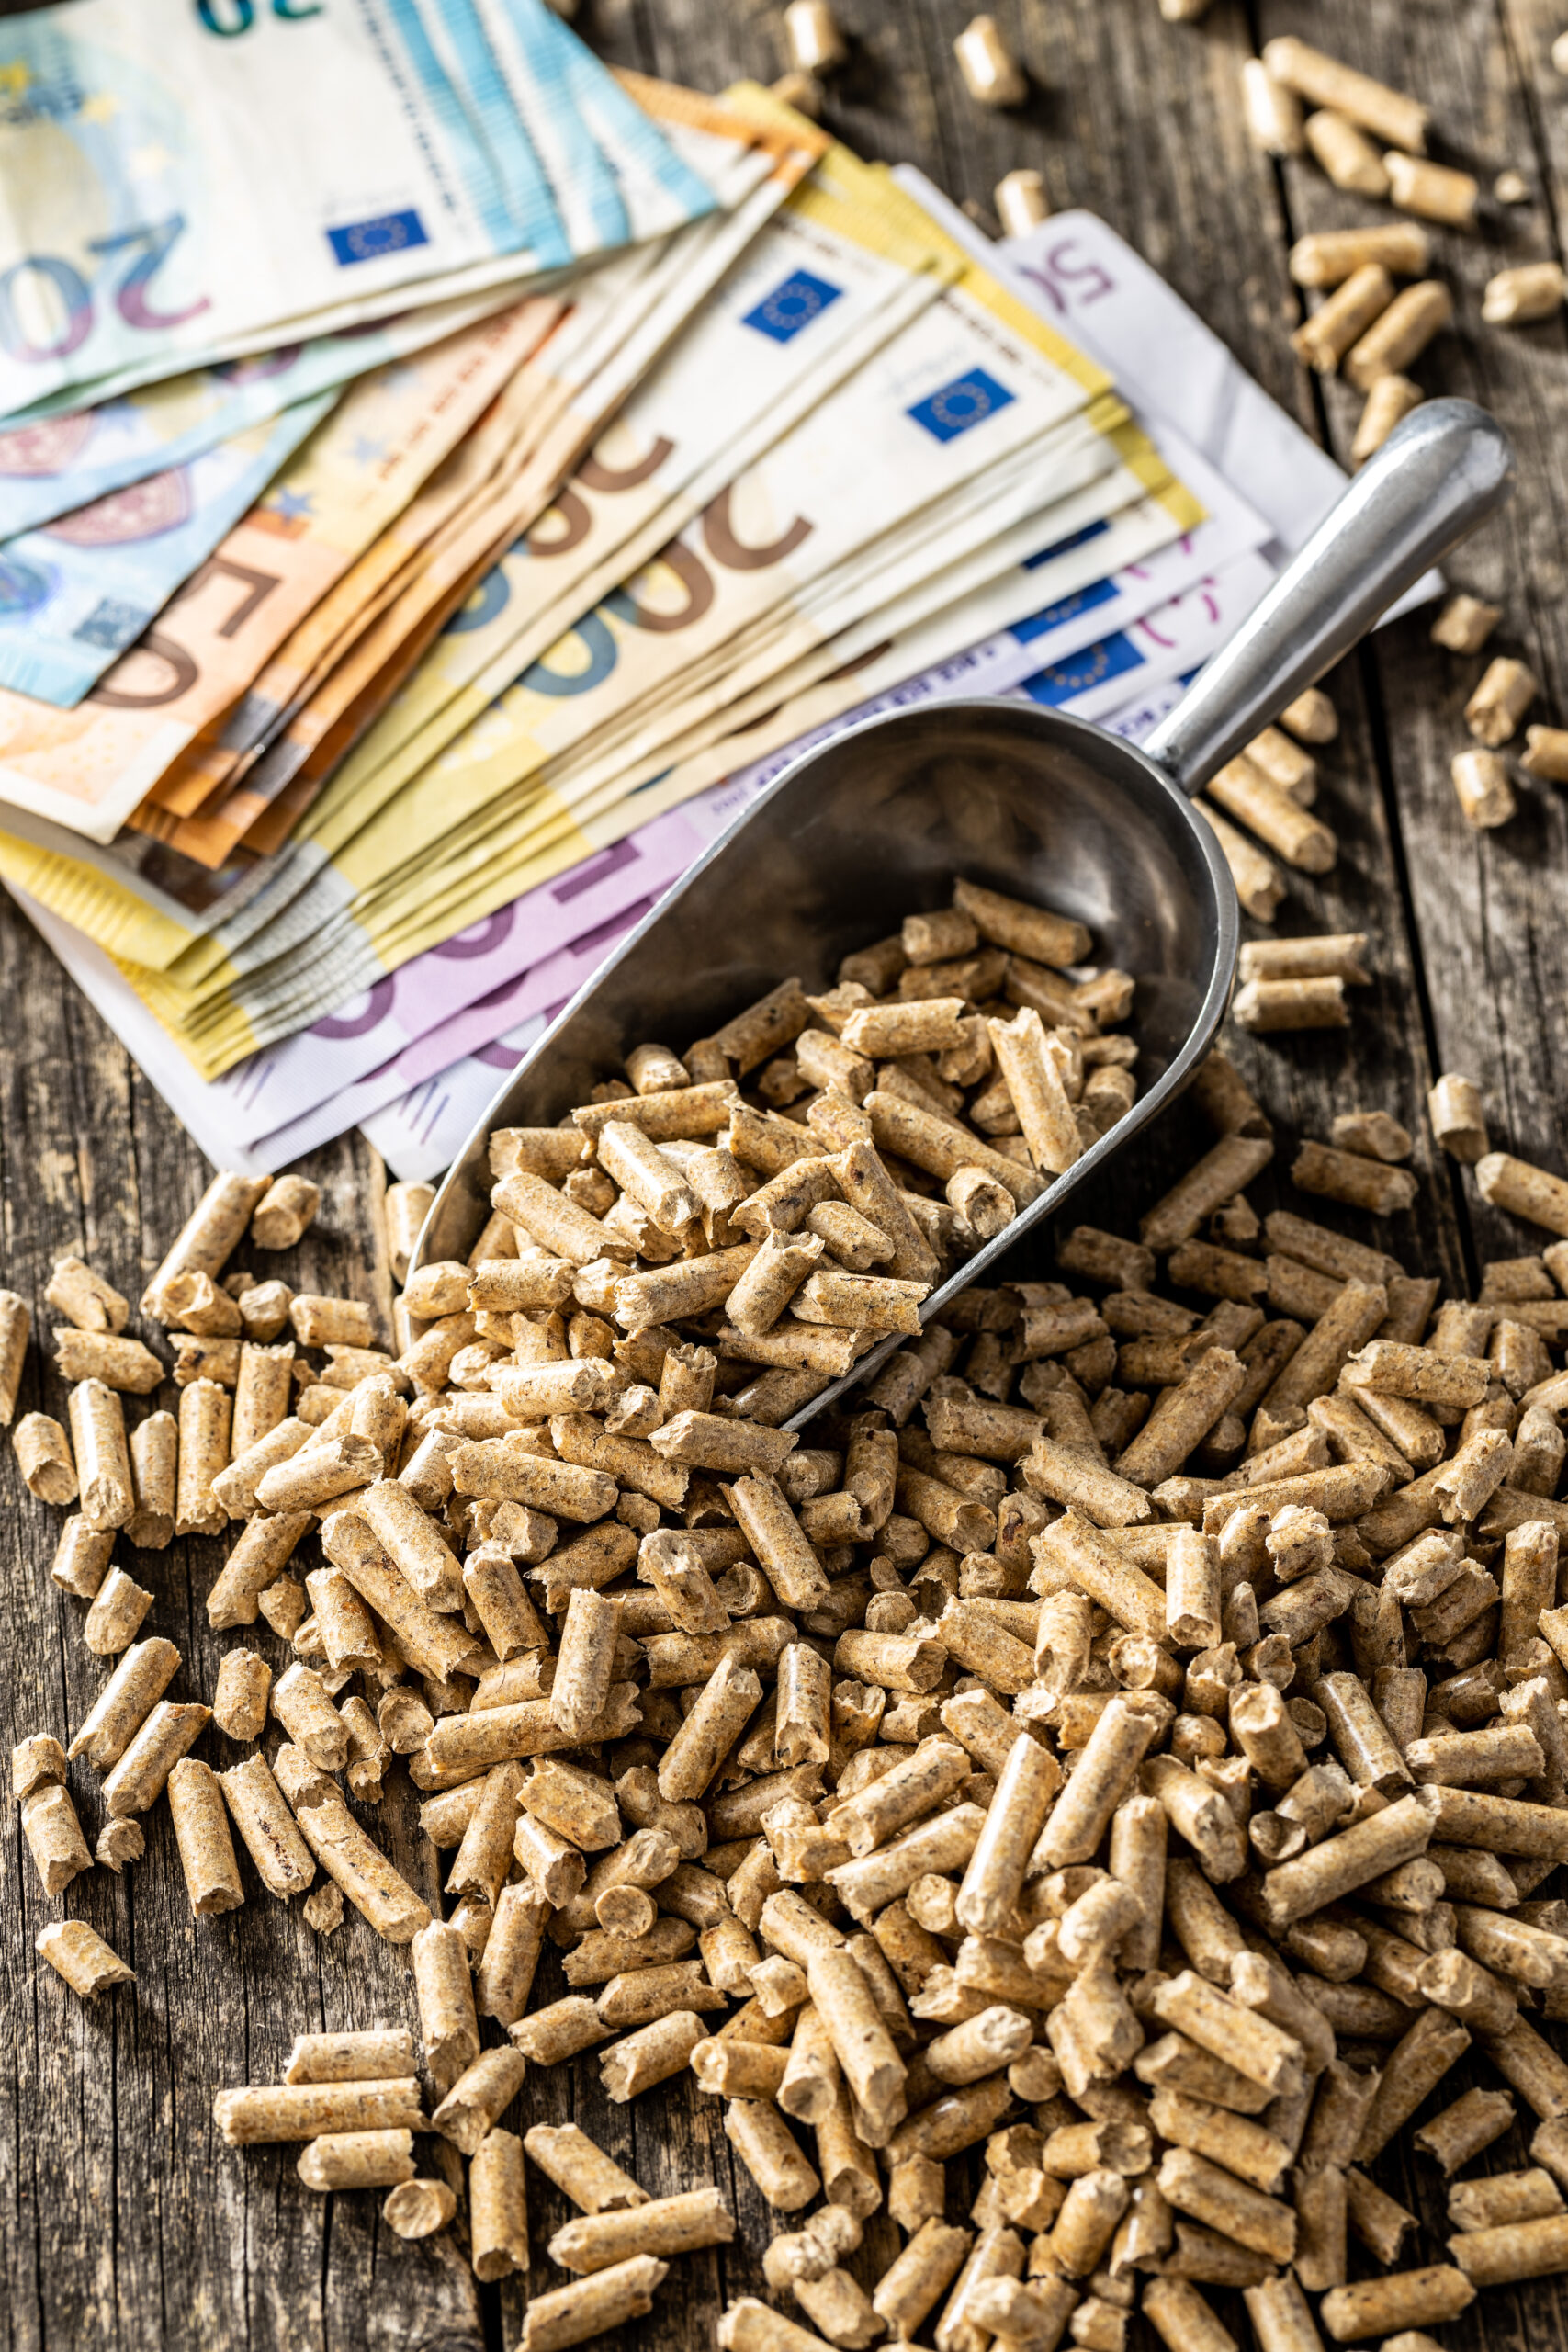 wooden pellets and euro banknotes.